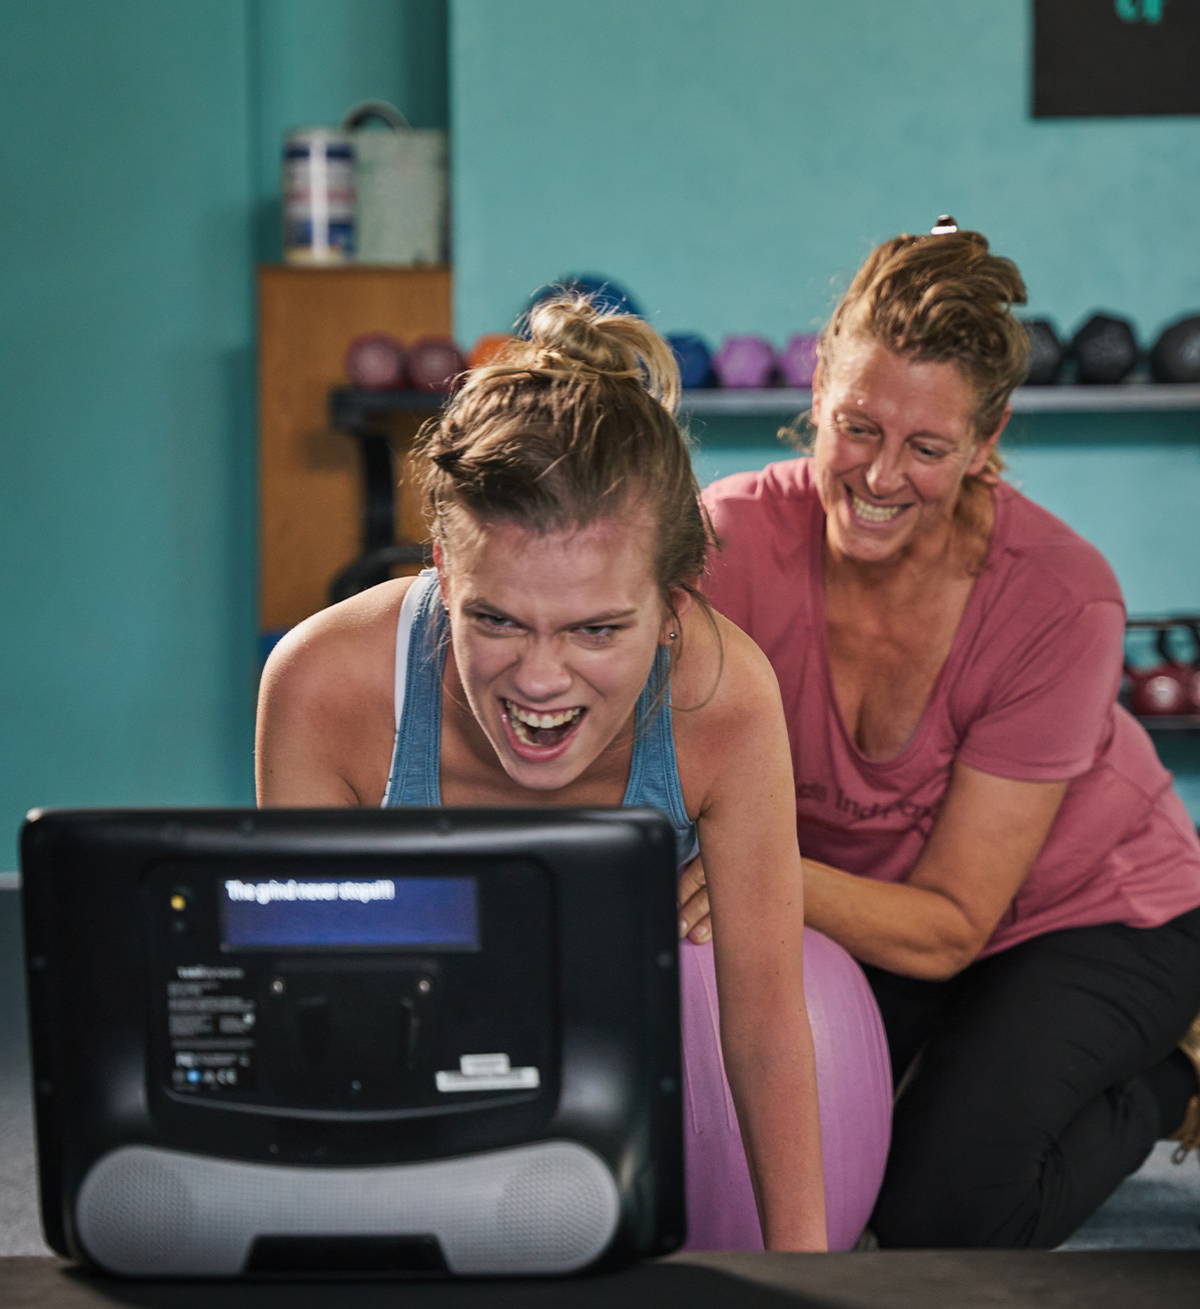 A young woman using an AAC device while working out